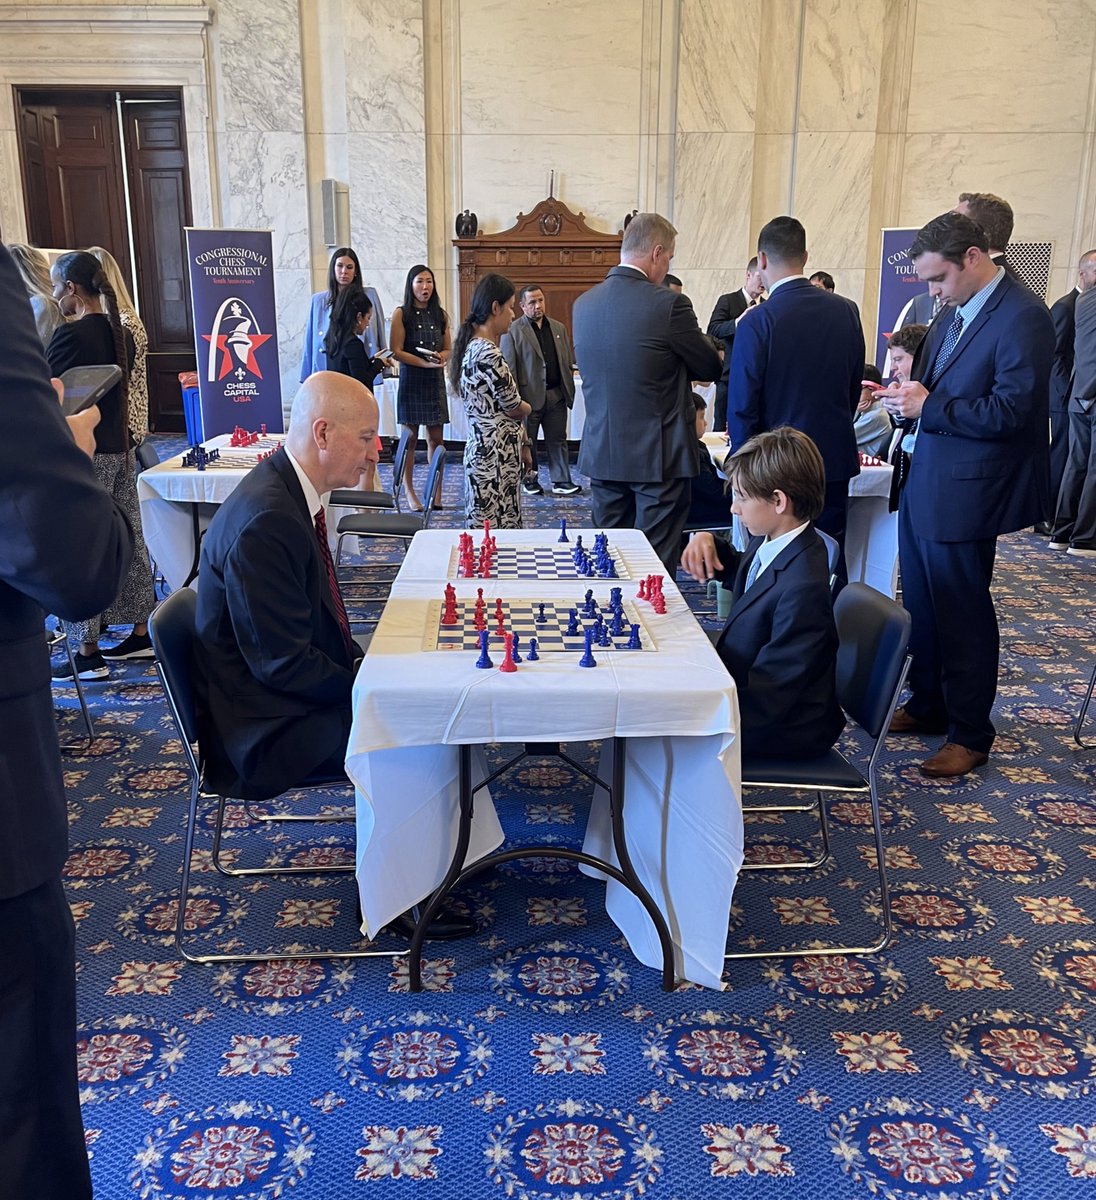 Some levity for your Senate Wednesday: a congressional chess tournament hosted by Sen. Schmitt This kid eventually smoked Sen. Ricketts (which he was a great sport about)